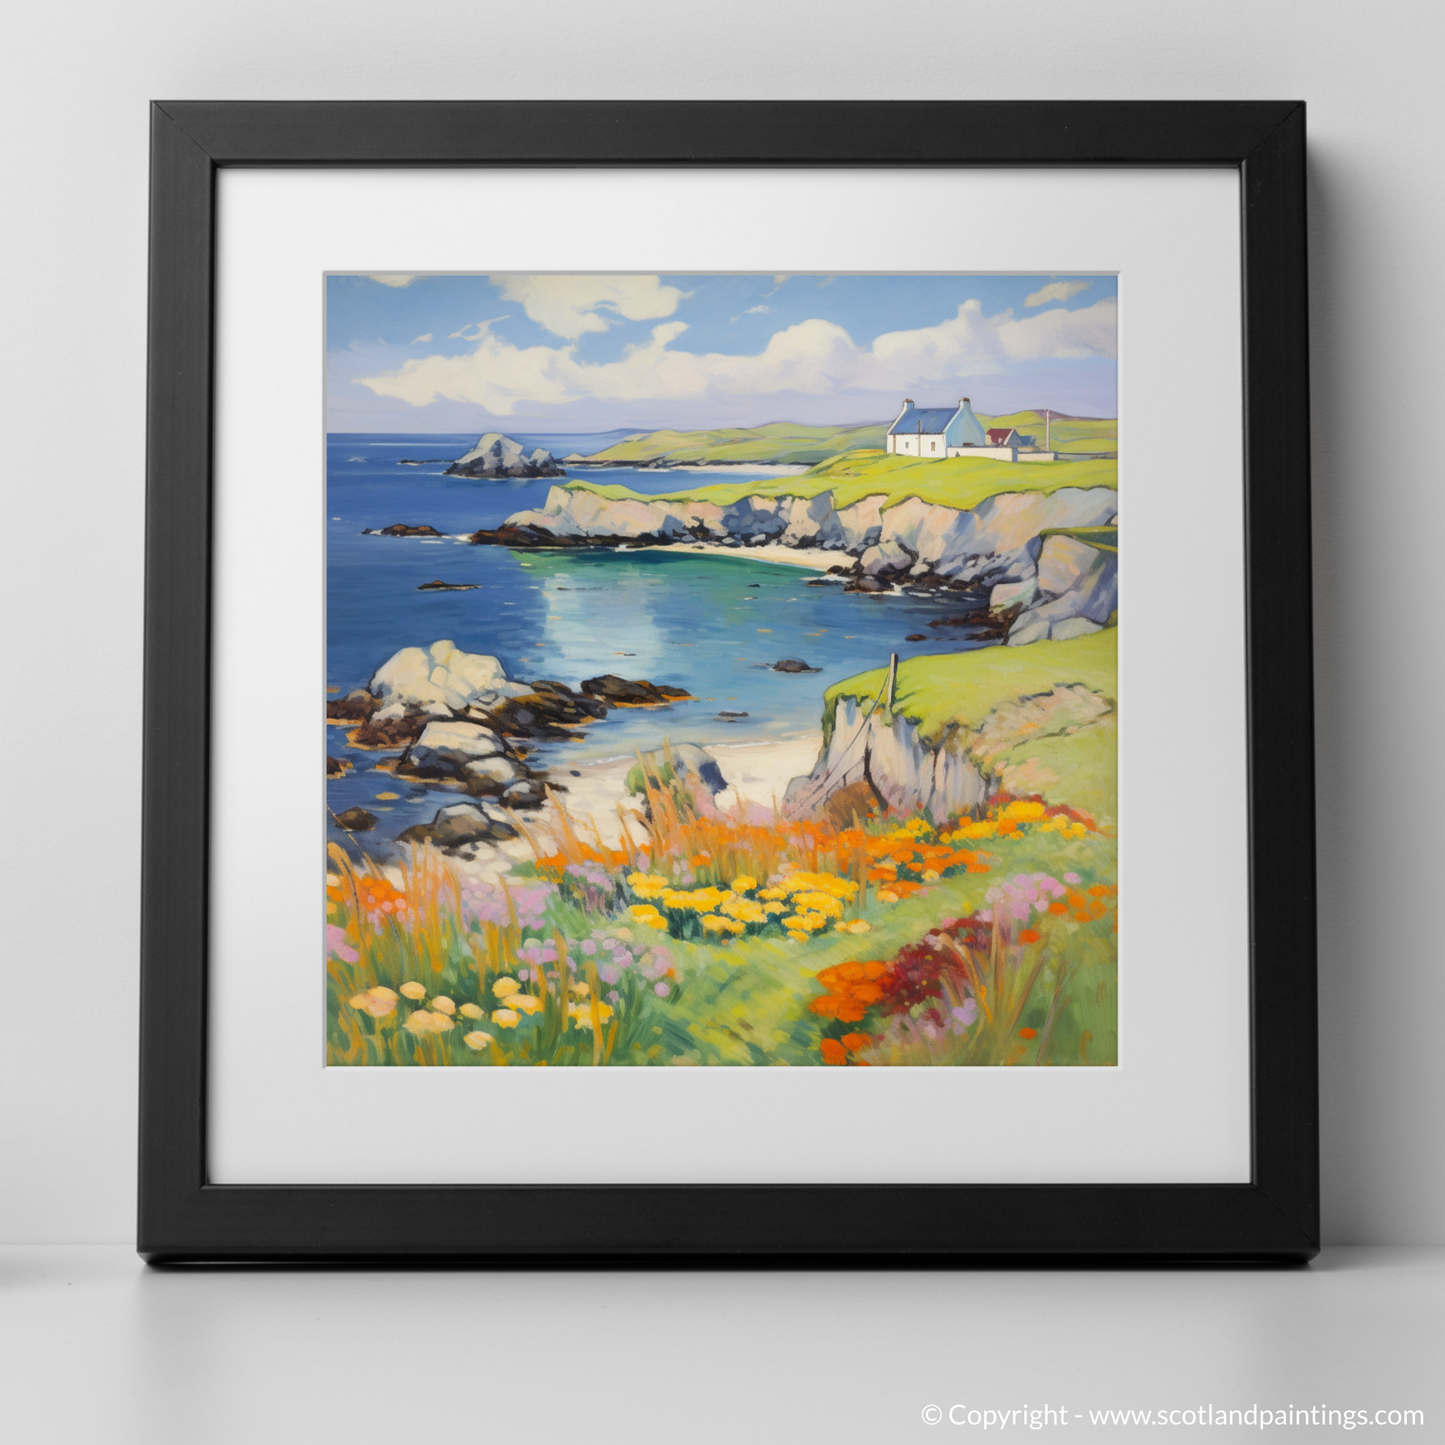 Art Print of Shetland, North of mainland Scotland in summer with a black frame